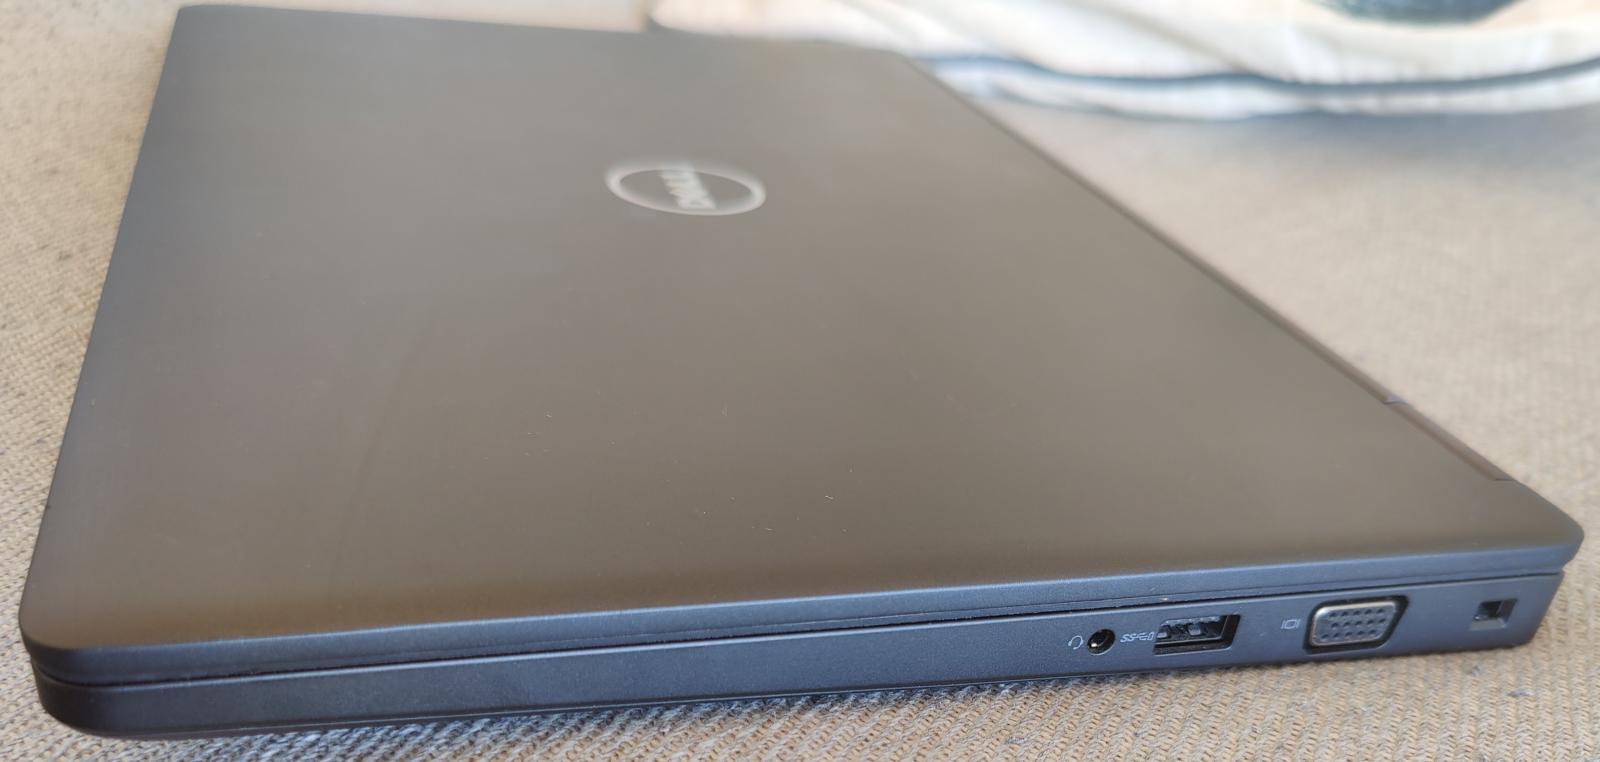 Photo of Dell Latitude 5480 - loaded with i7-7820HQ, 32GB RAM, 500GB SSD, etc.